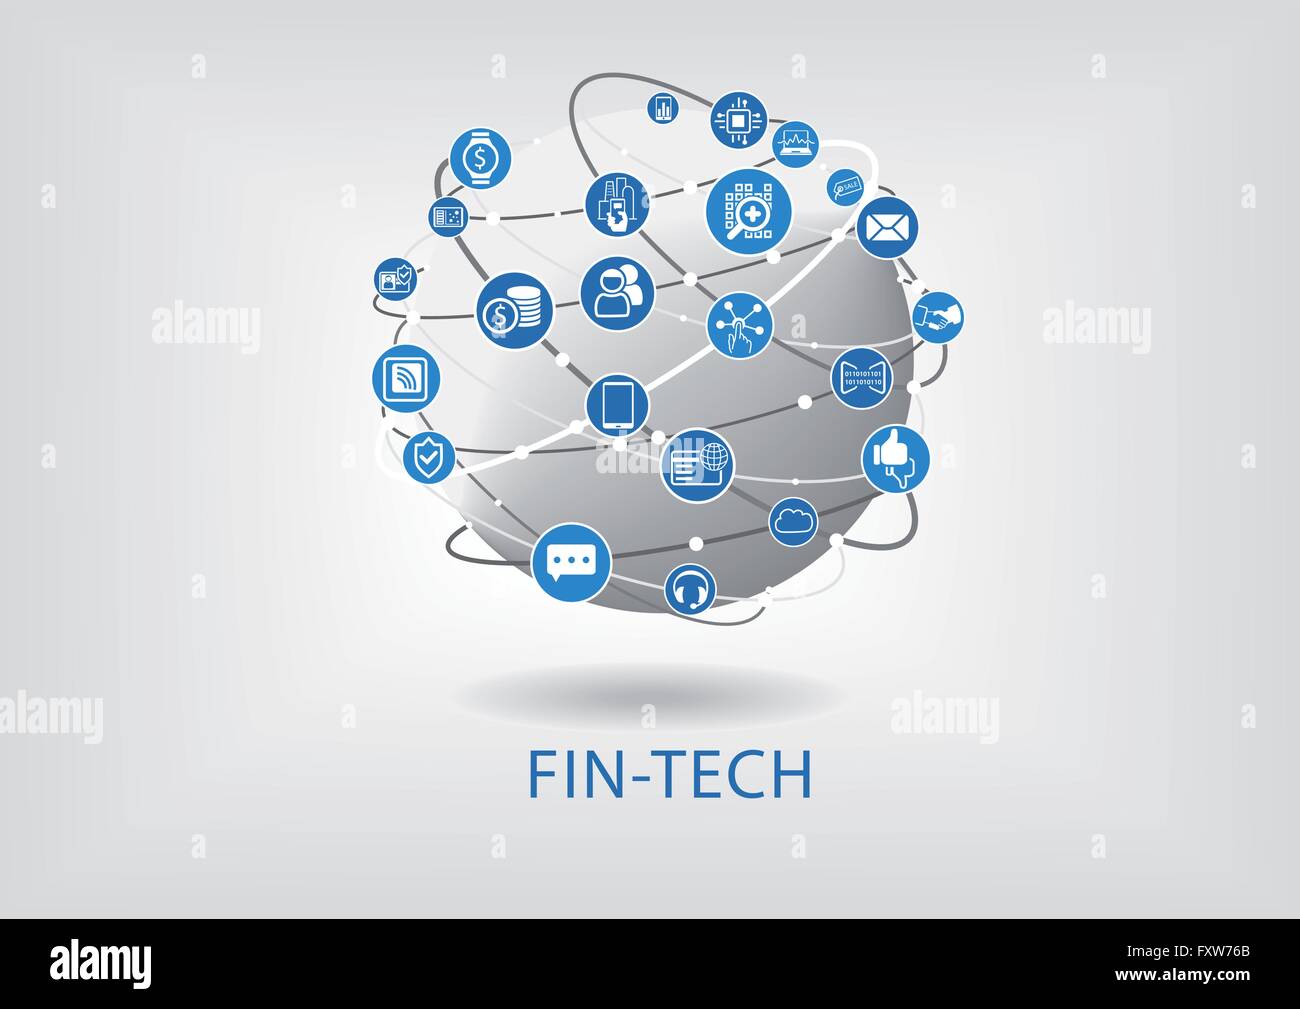 Fin-tech (financial technology) vector infographic and background Stock Vector